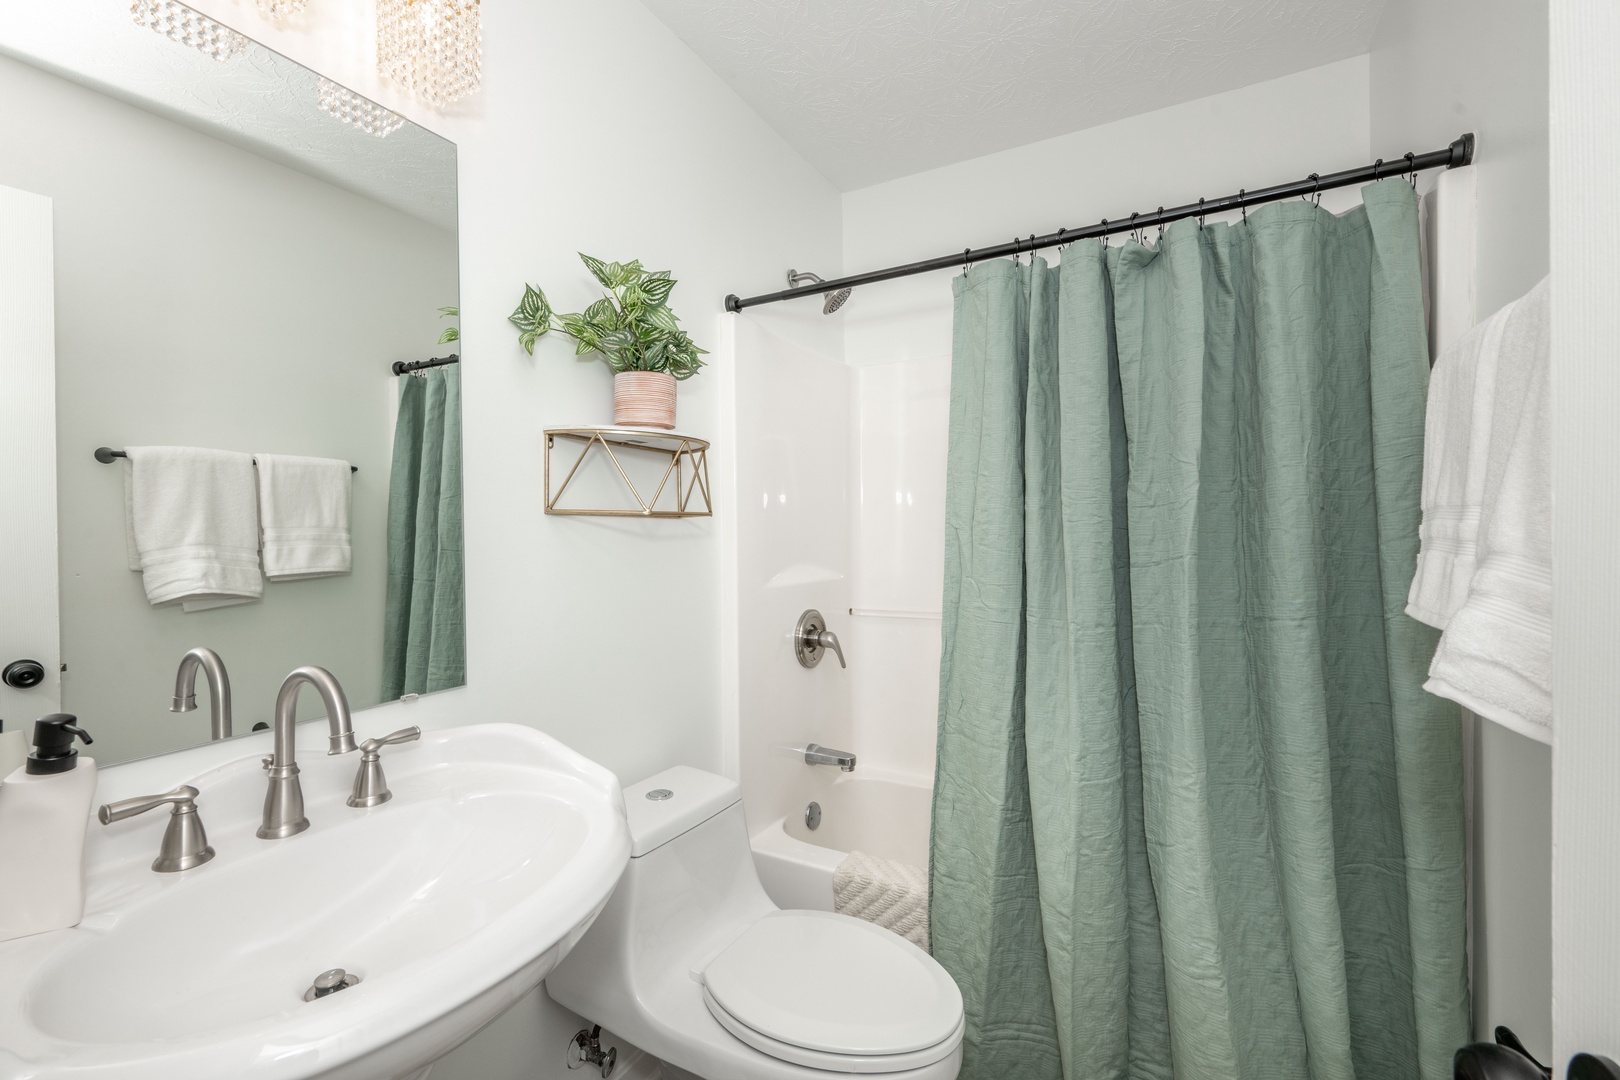 This full bathroom provides a pedestal sink & shower/tub combo